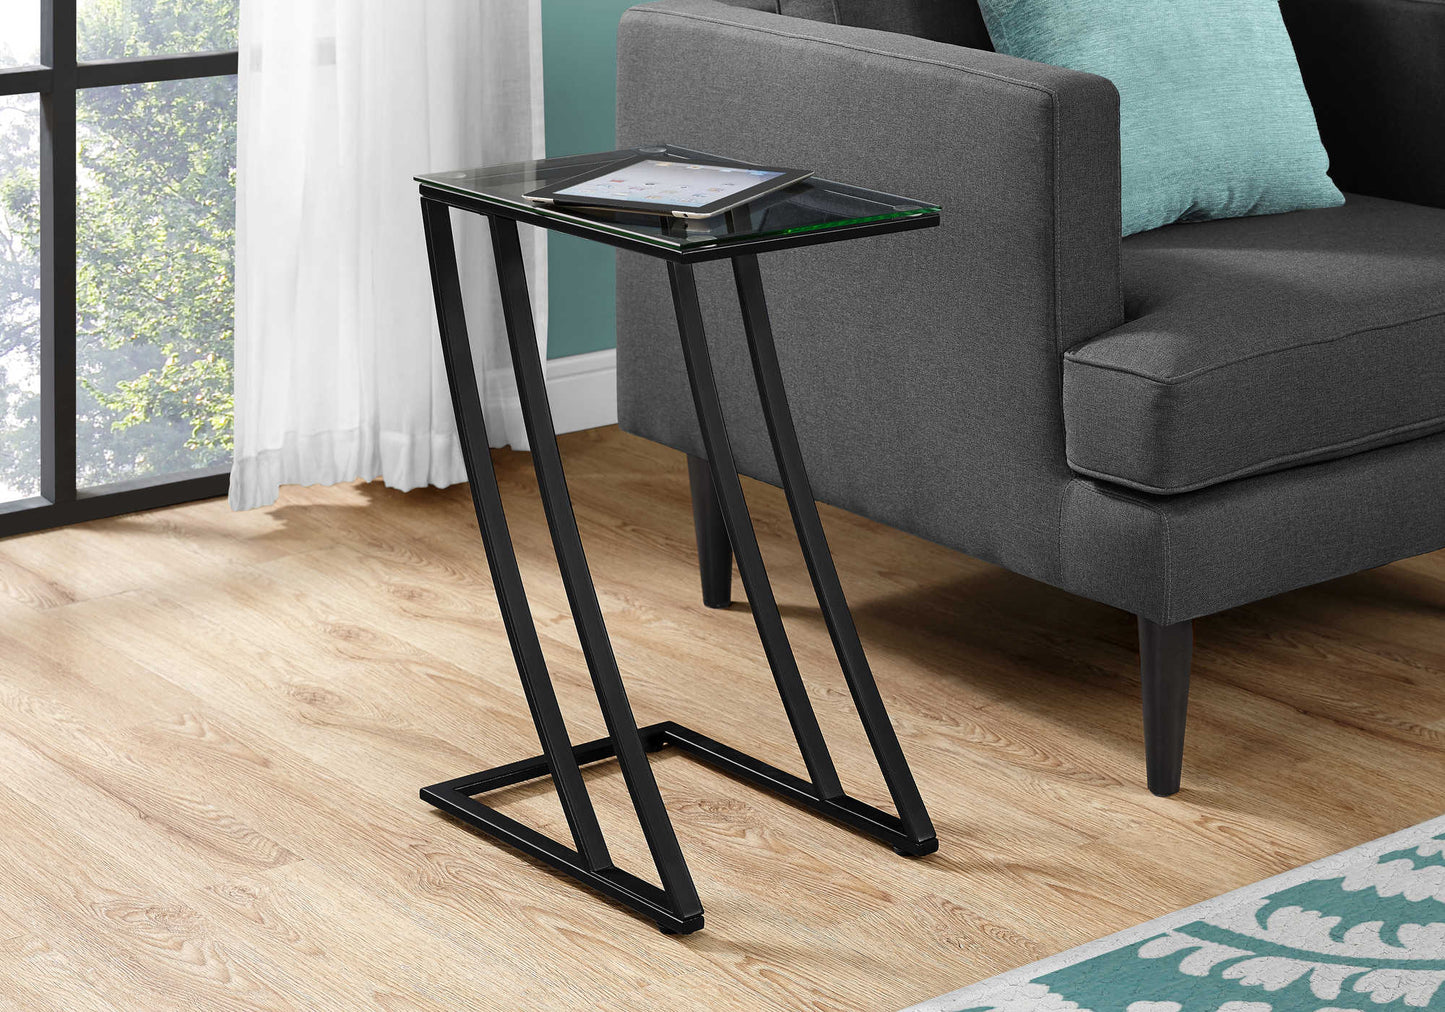 12”L/24”H Modern Z-Style Metal End Table with Glass Tabletop